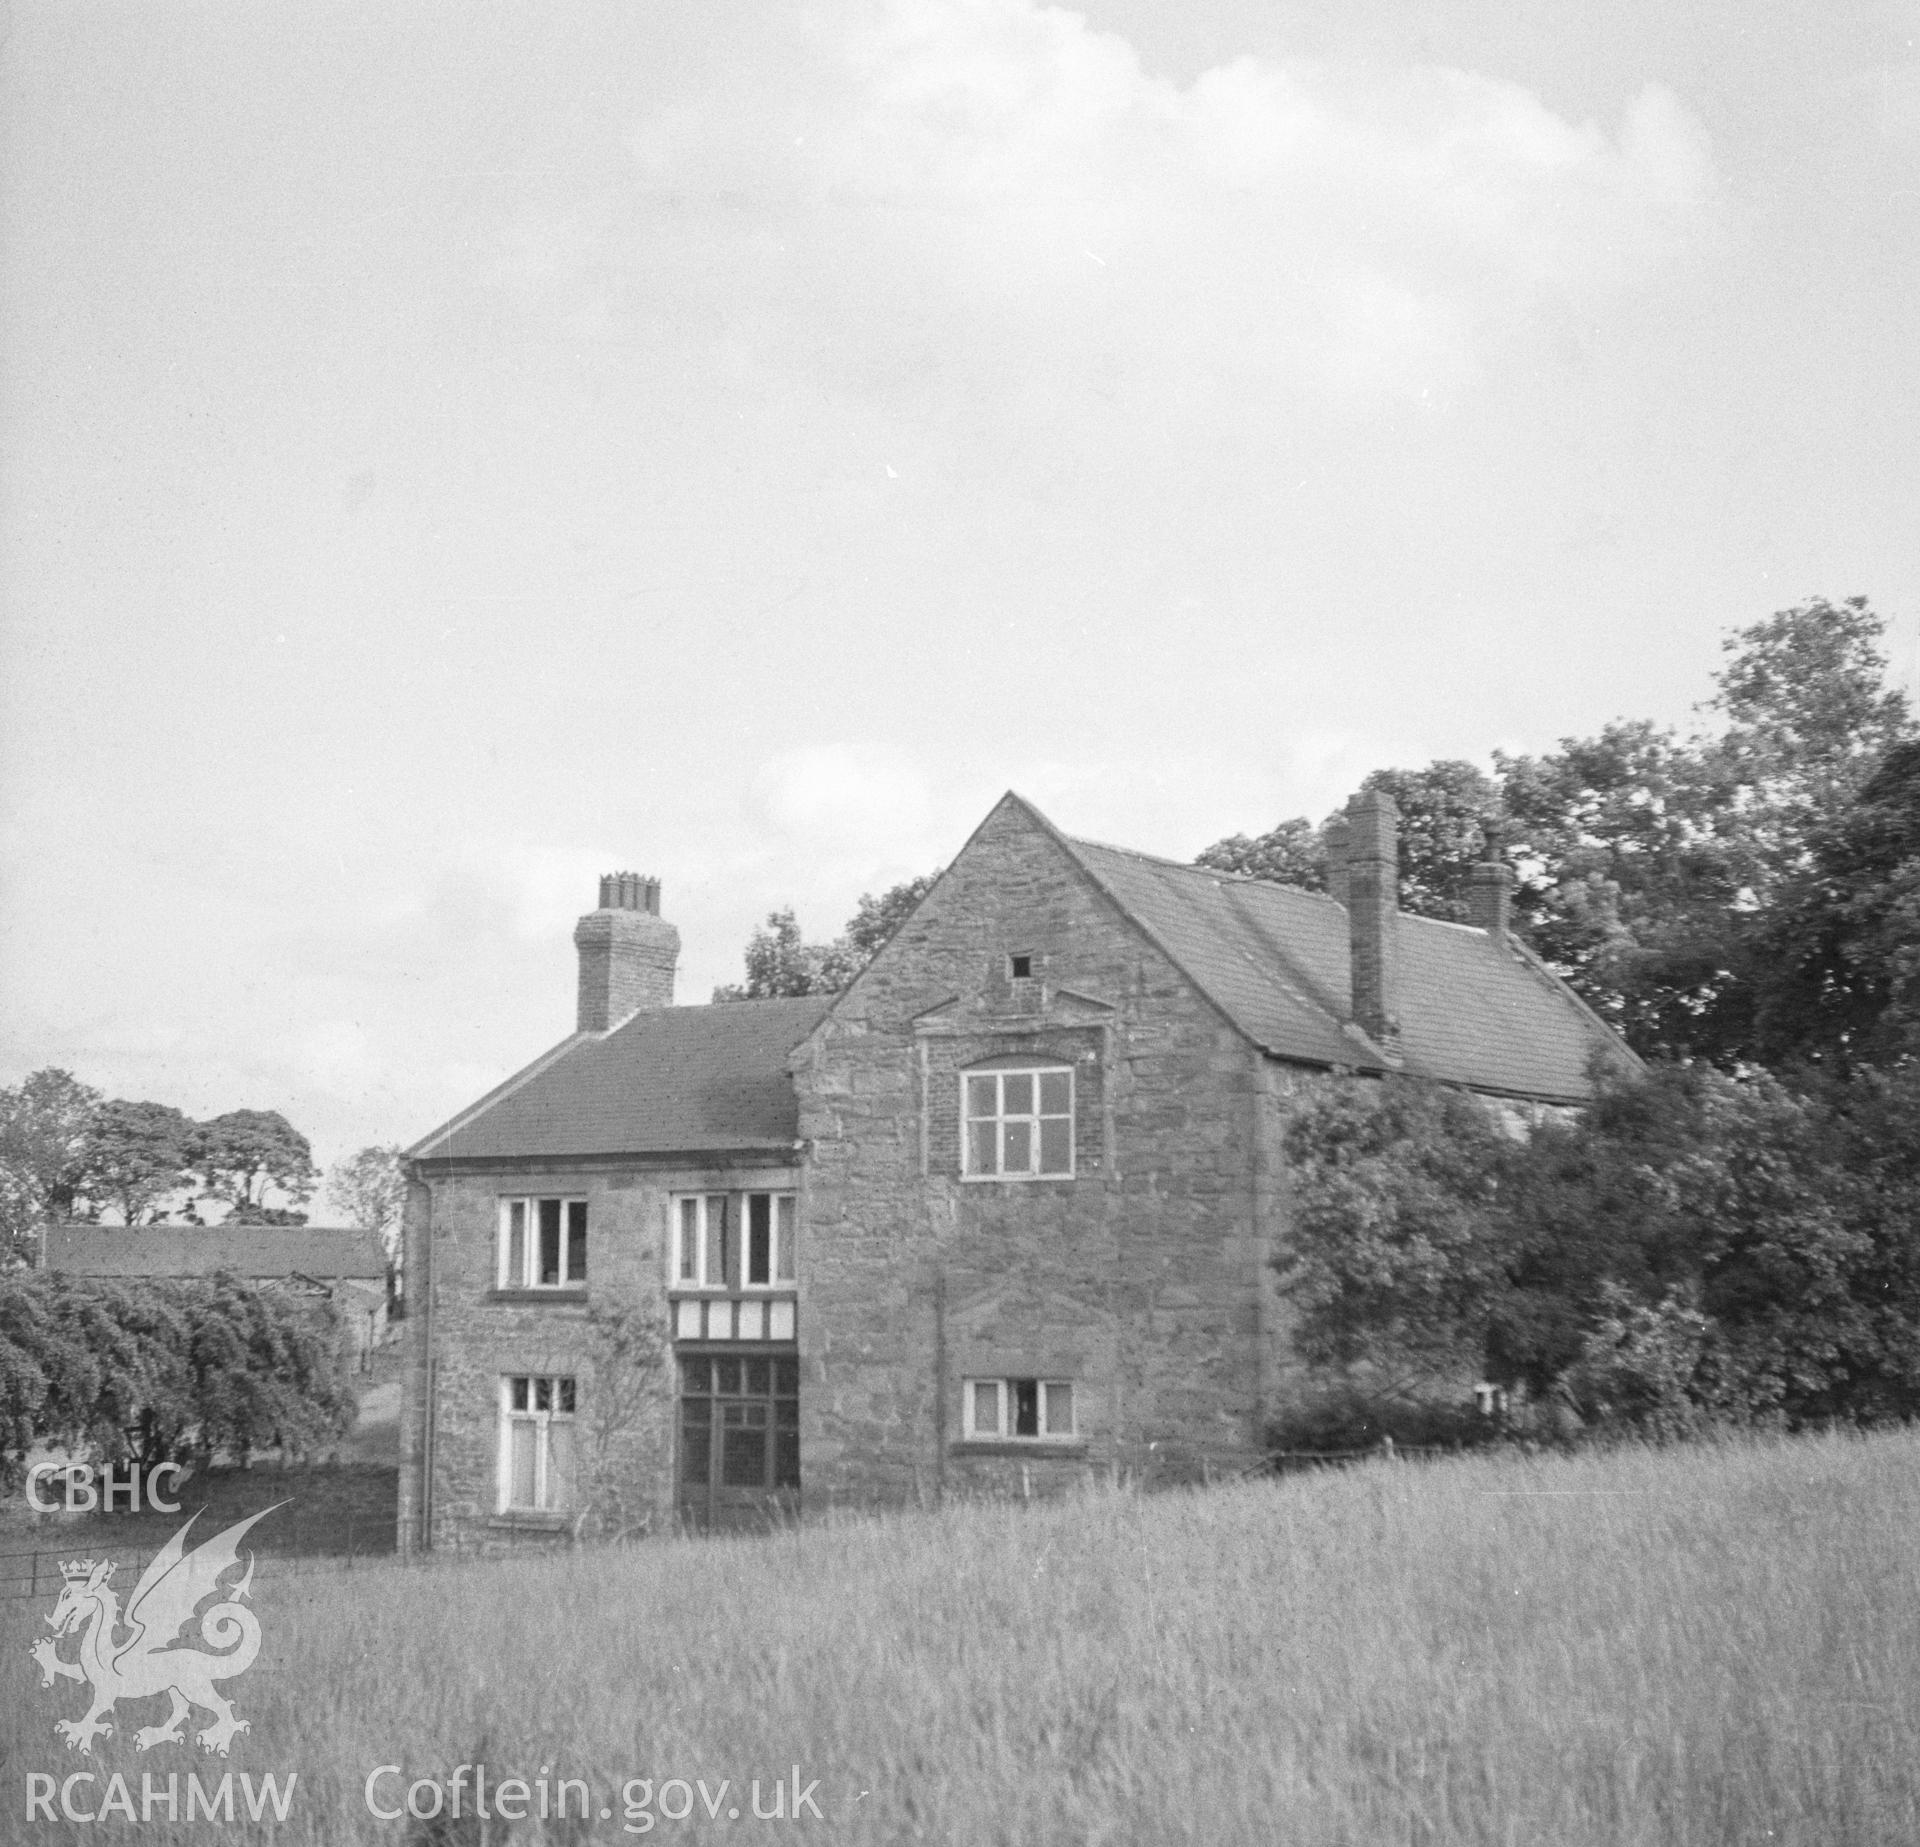 Digital copy of a back and white nitrate negative showing view of Llyseurgain in its setting.